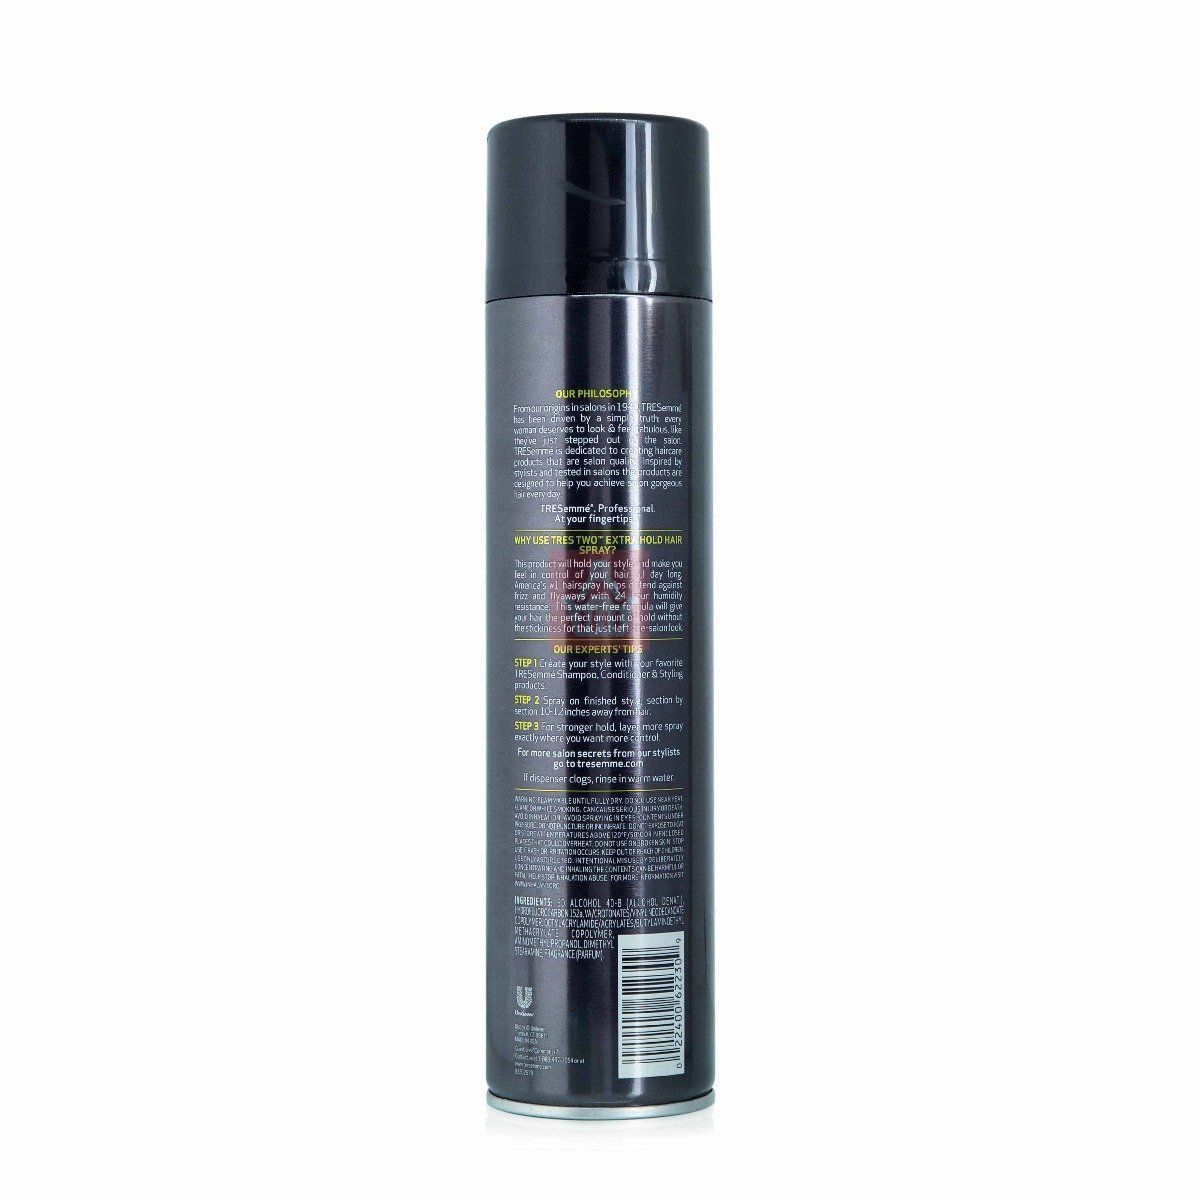 Tresemme Tres Two Extra Hold Hair Spray - 413g